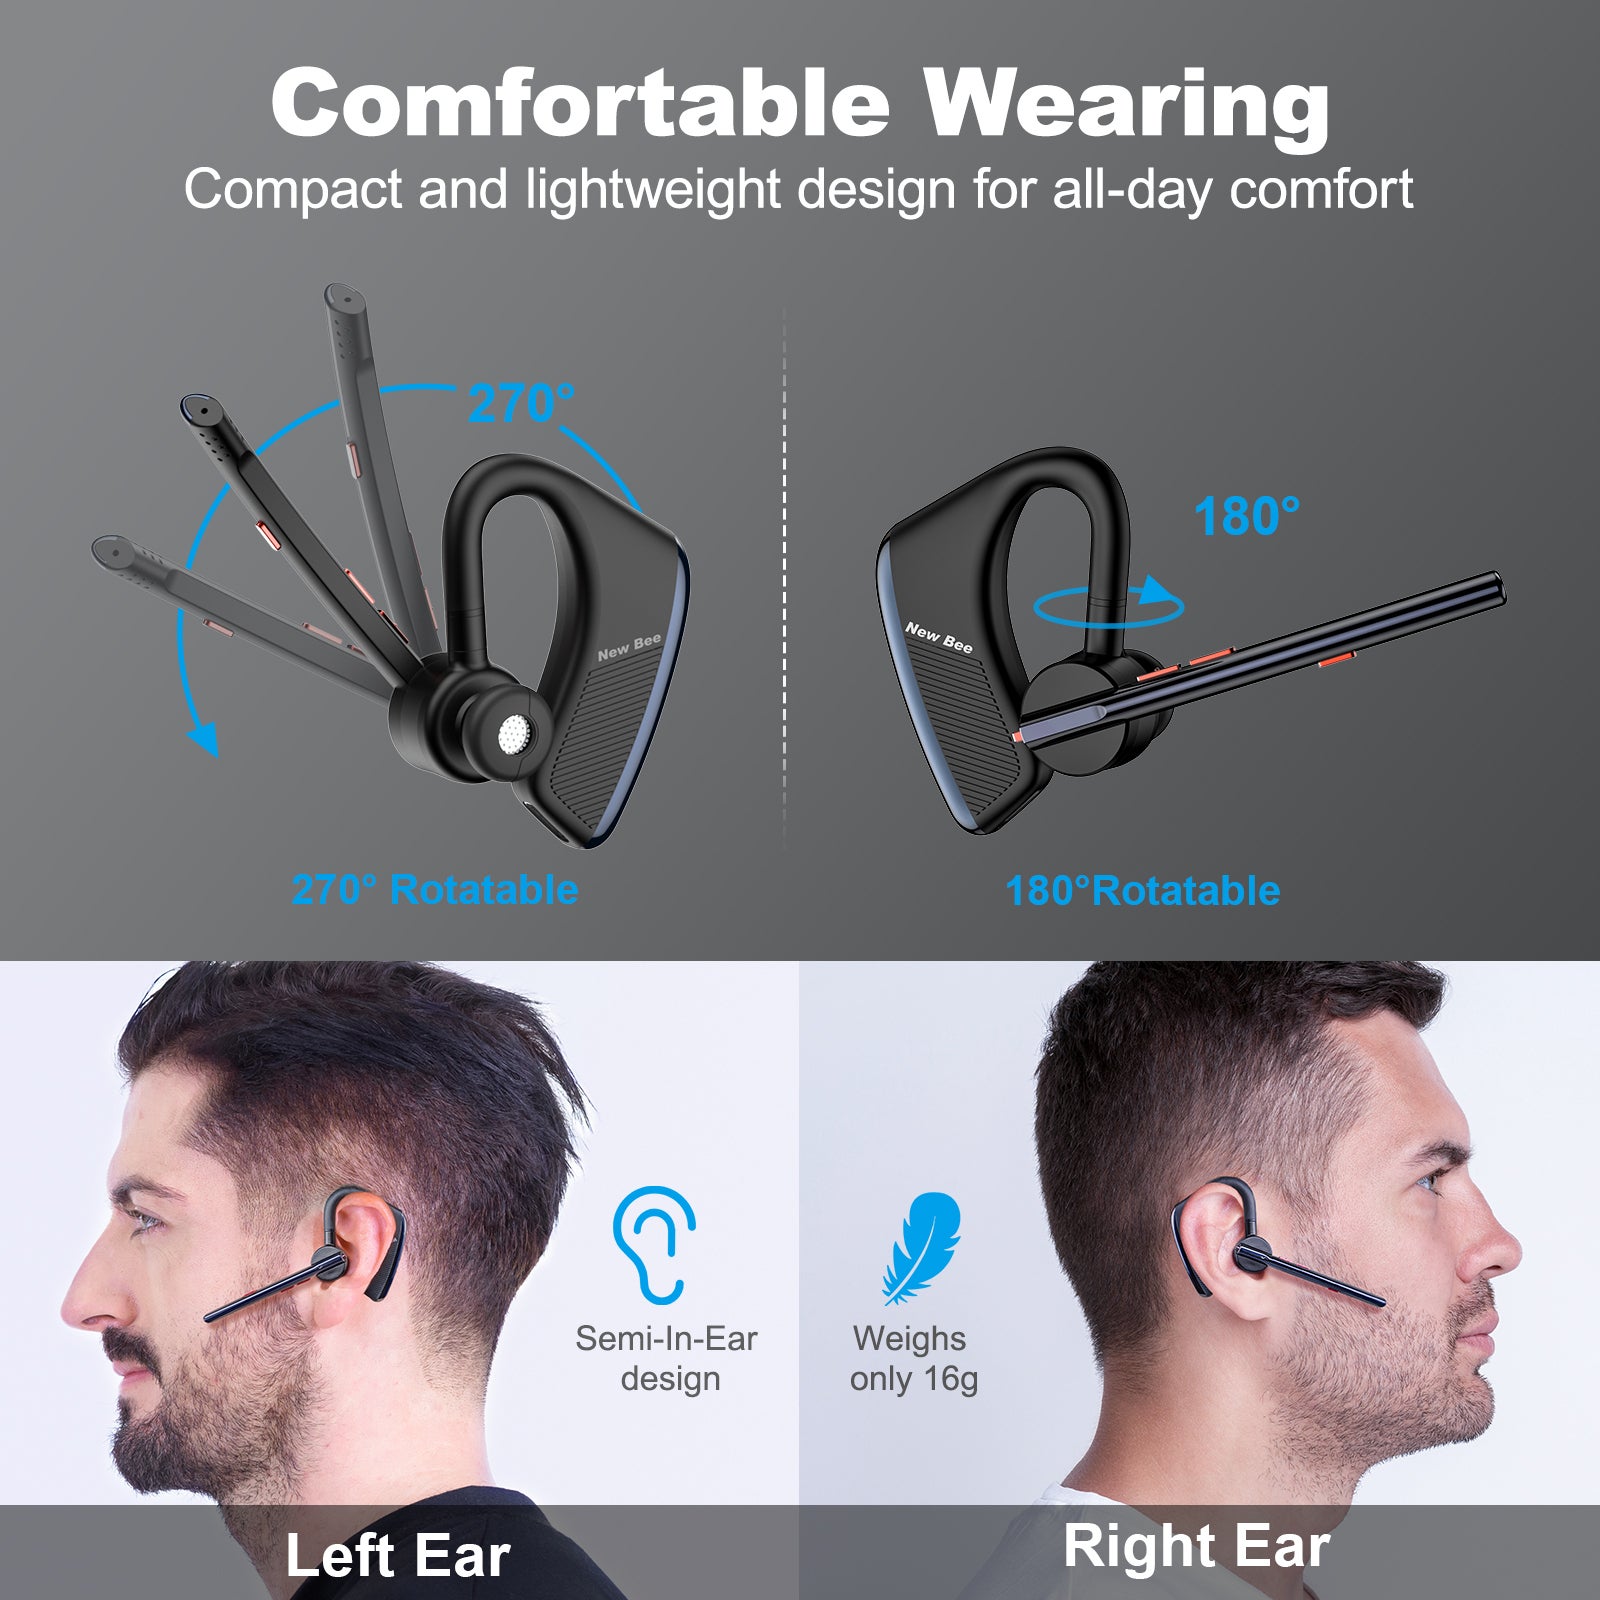 New Bee M50 headset: comfort and clear audio, grab your discount here!